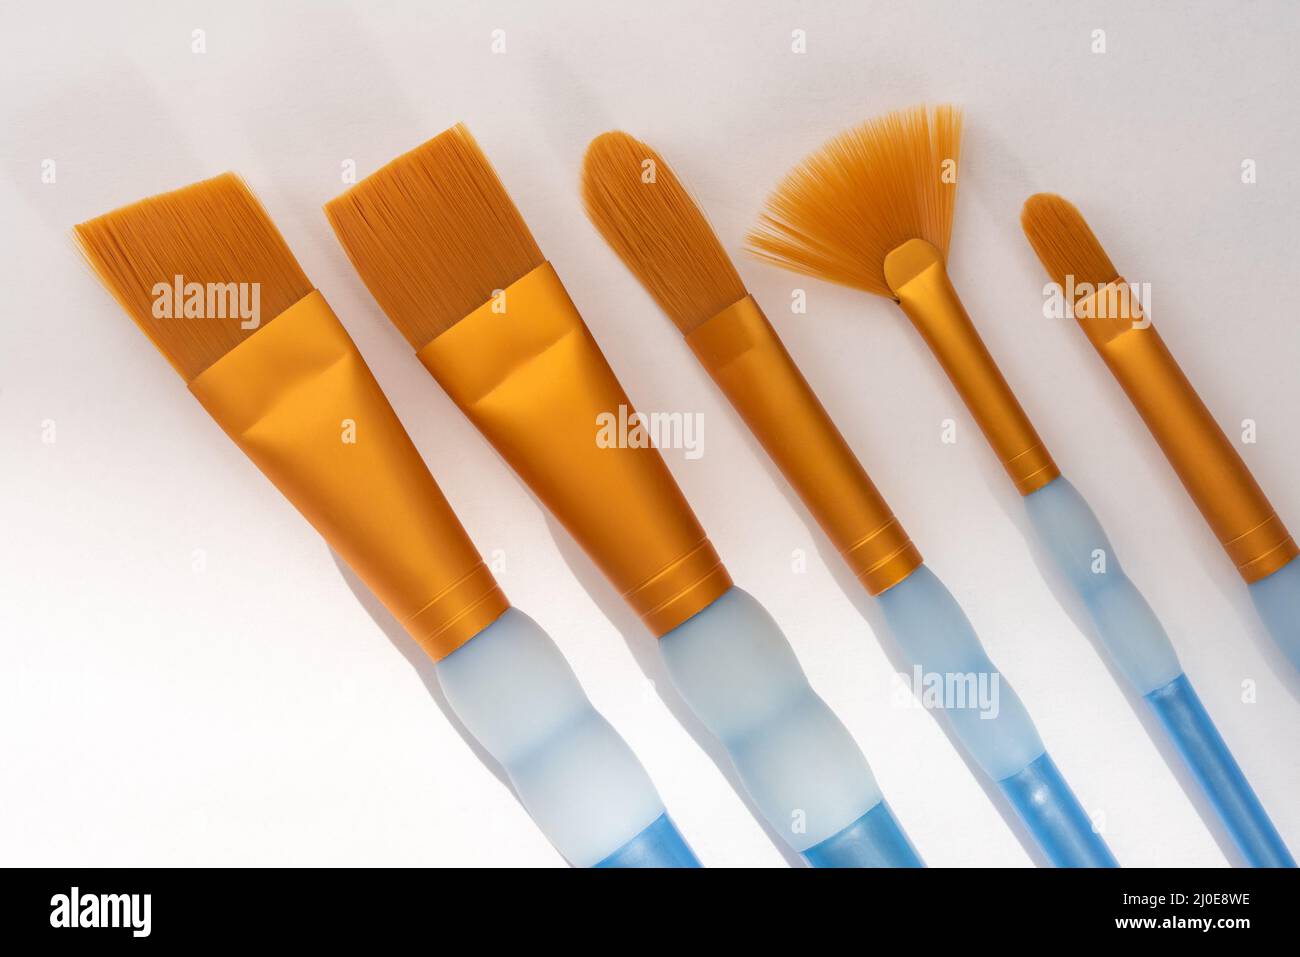 New Clean Artist's Paint Brushes Stock Photo